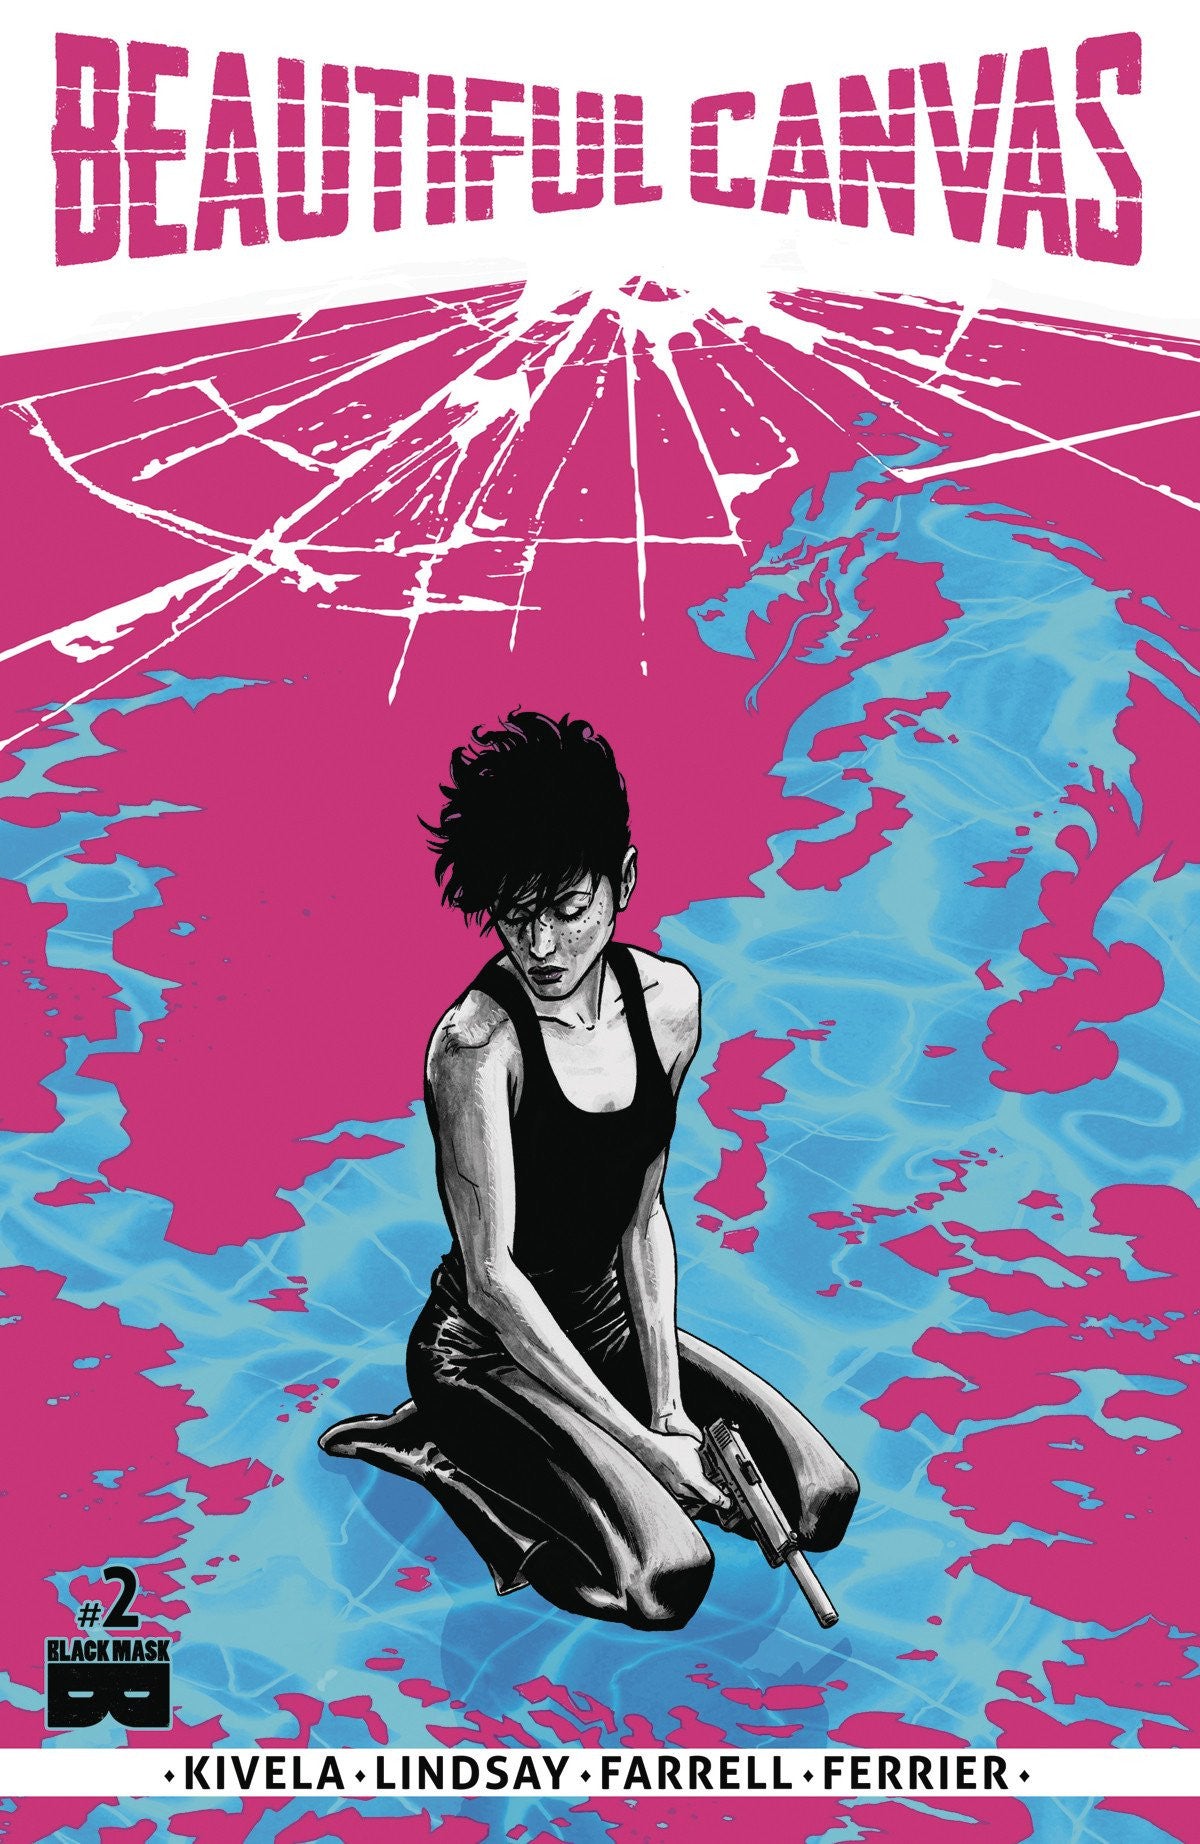 BEAUTIFUL CANVAS #2 COVER